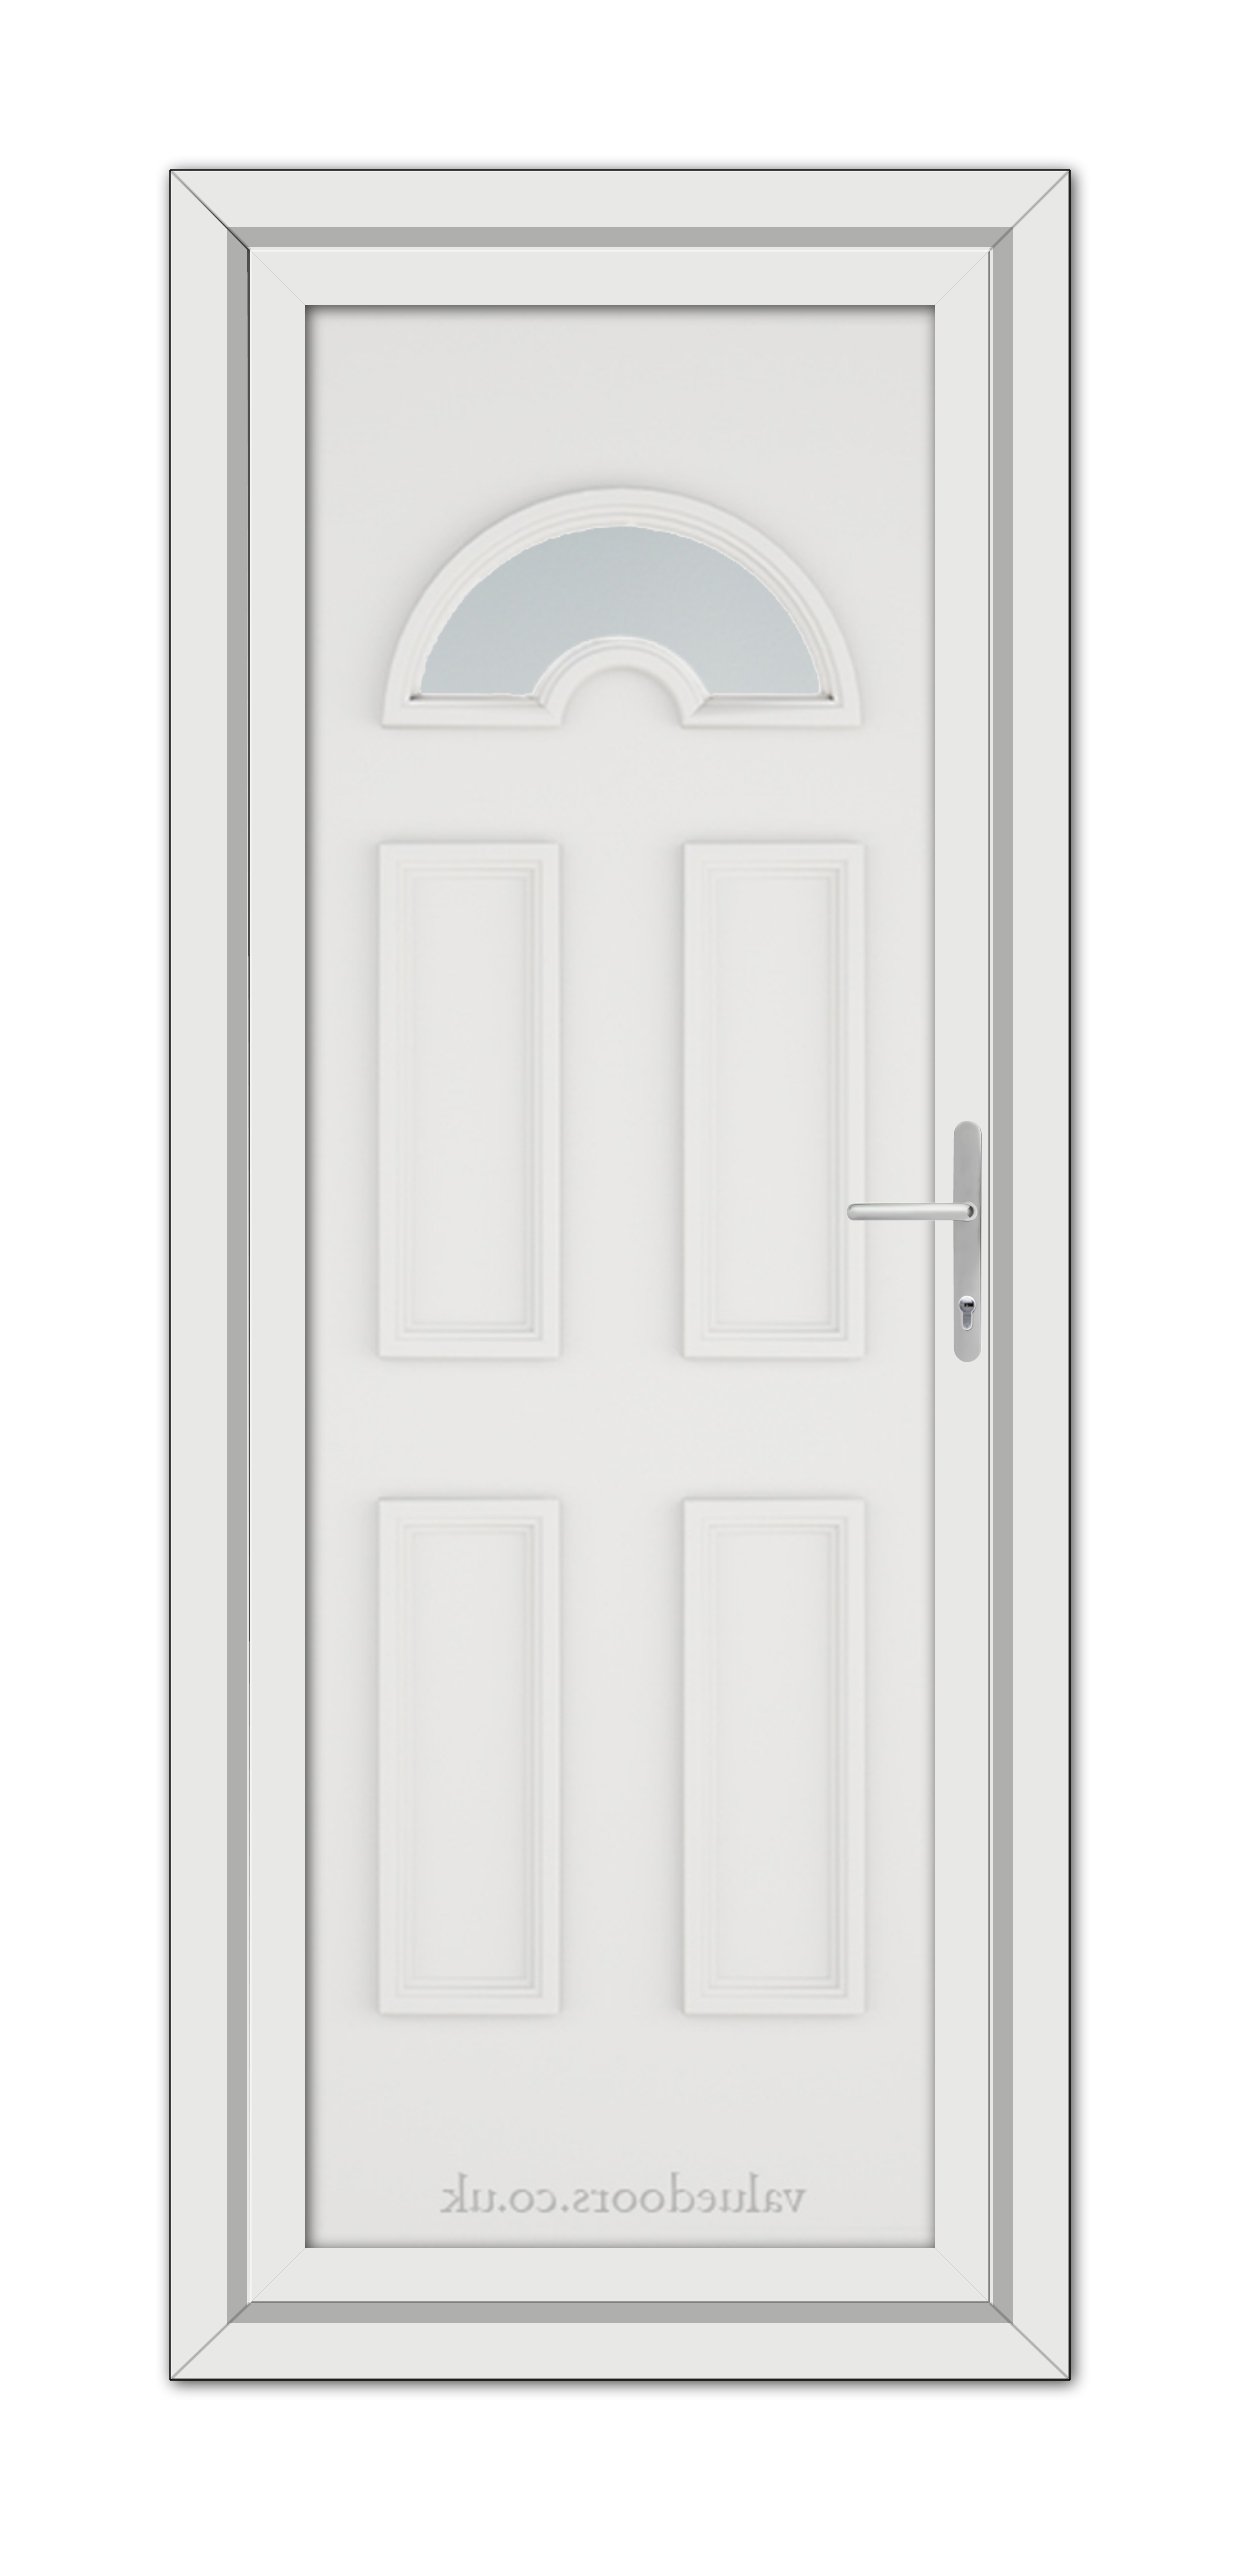 A White Sandringham uPVC Door with four recessed panels, a silver handle, and a fanlight window, set within a gray frame.